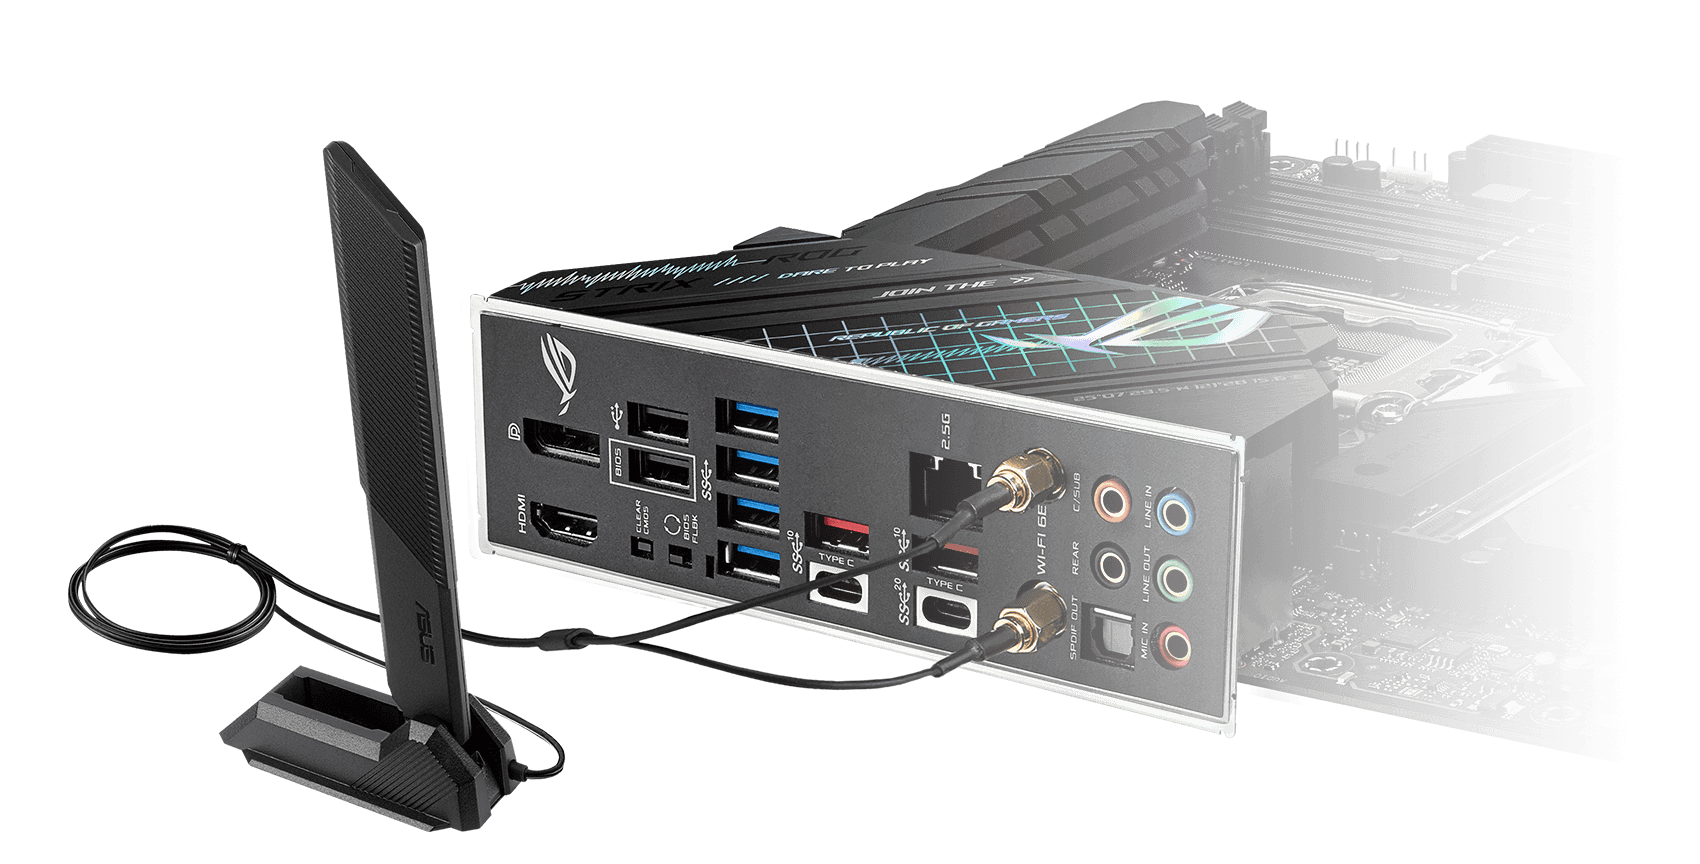 ROG Strix Z690-G Gaming WiFi features WiFi 6E, along with 2.5 Gb Ethernet